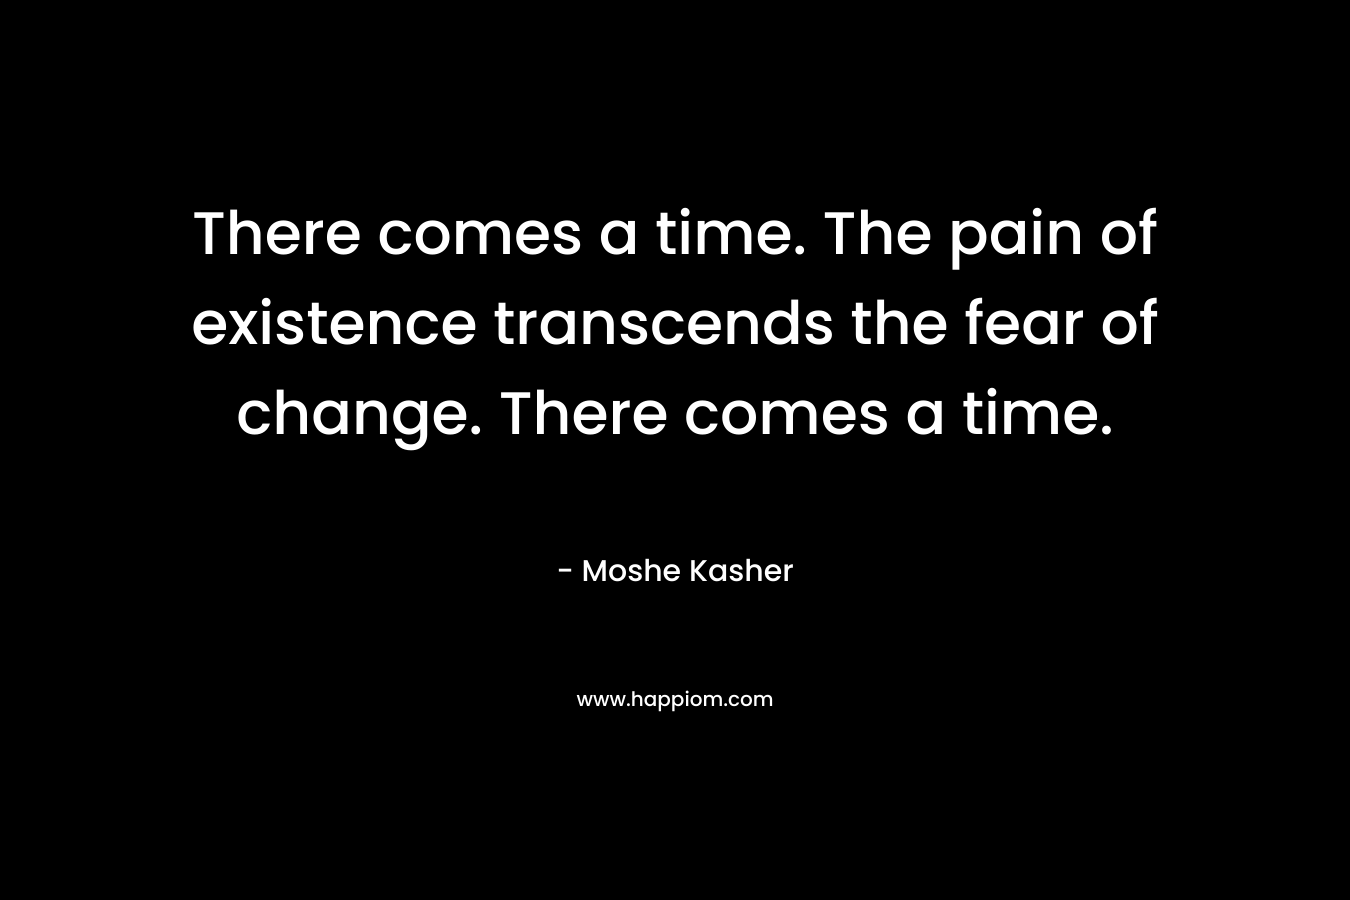 There comes a time. The pain of existence transcends the fear of change. There comes a time. – Moshe Kasher